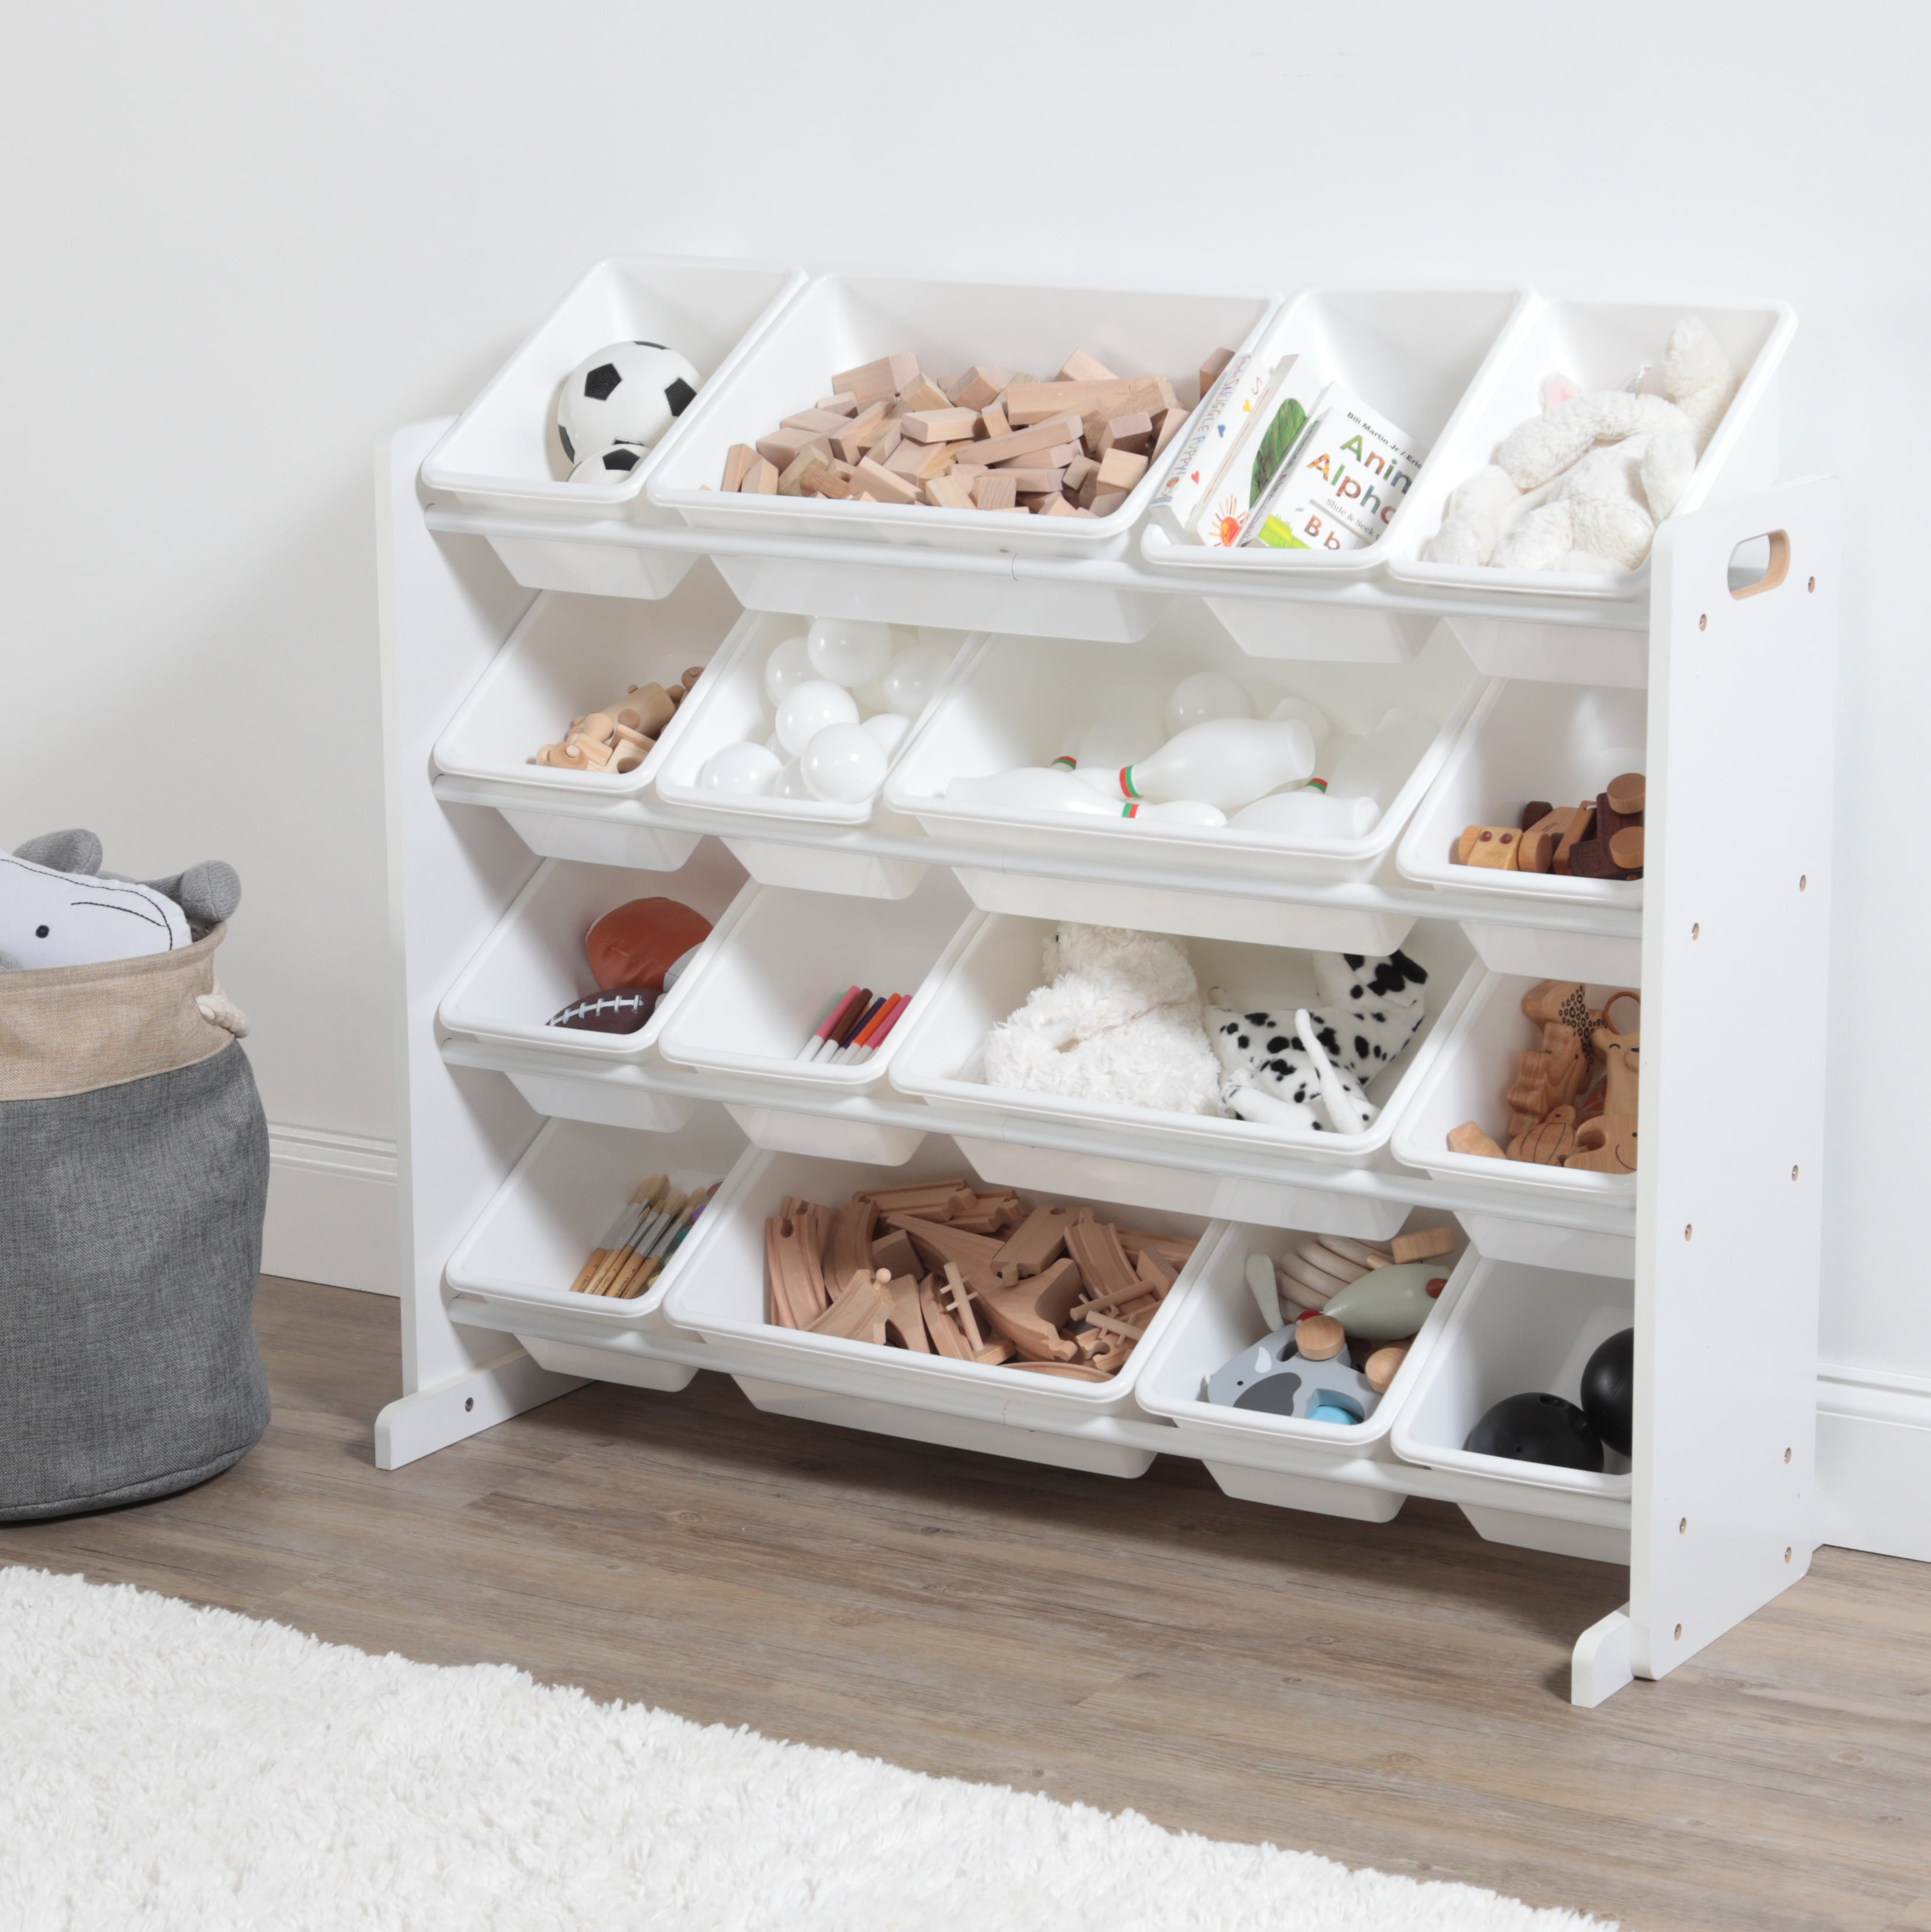 Super-Sized Toy Organizer with 16 